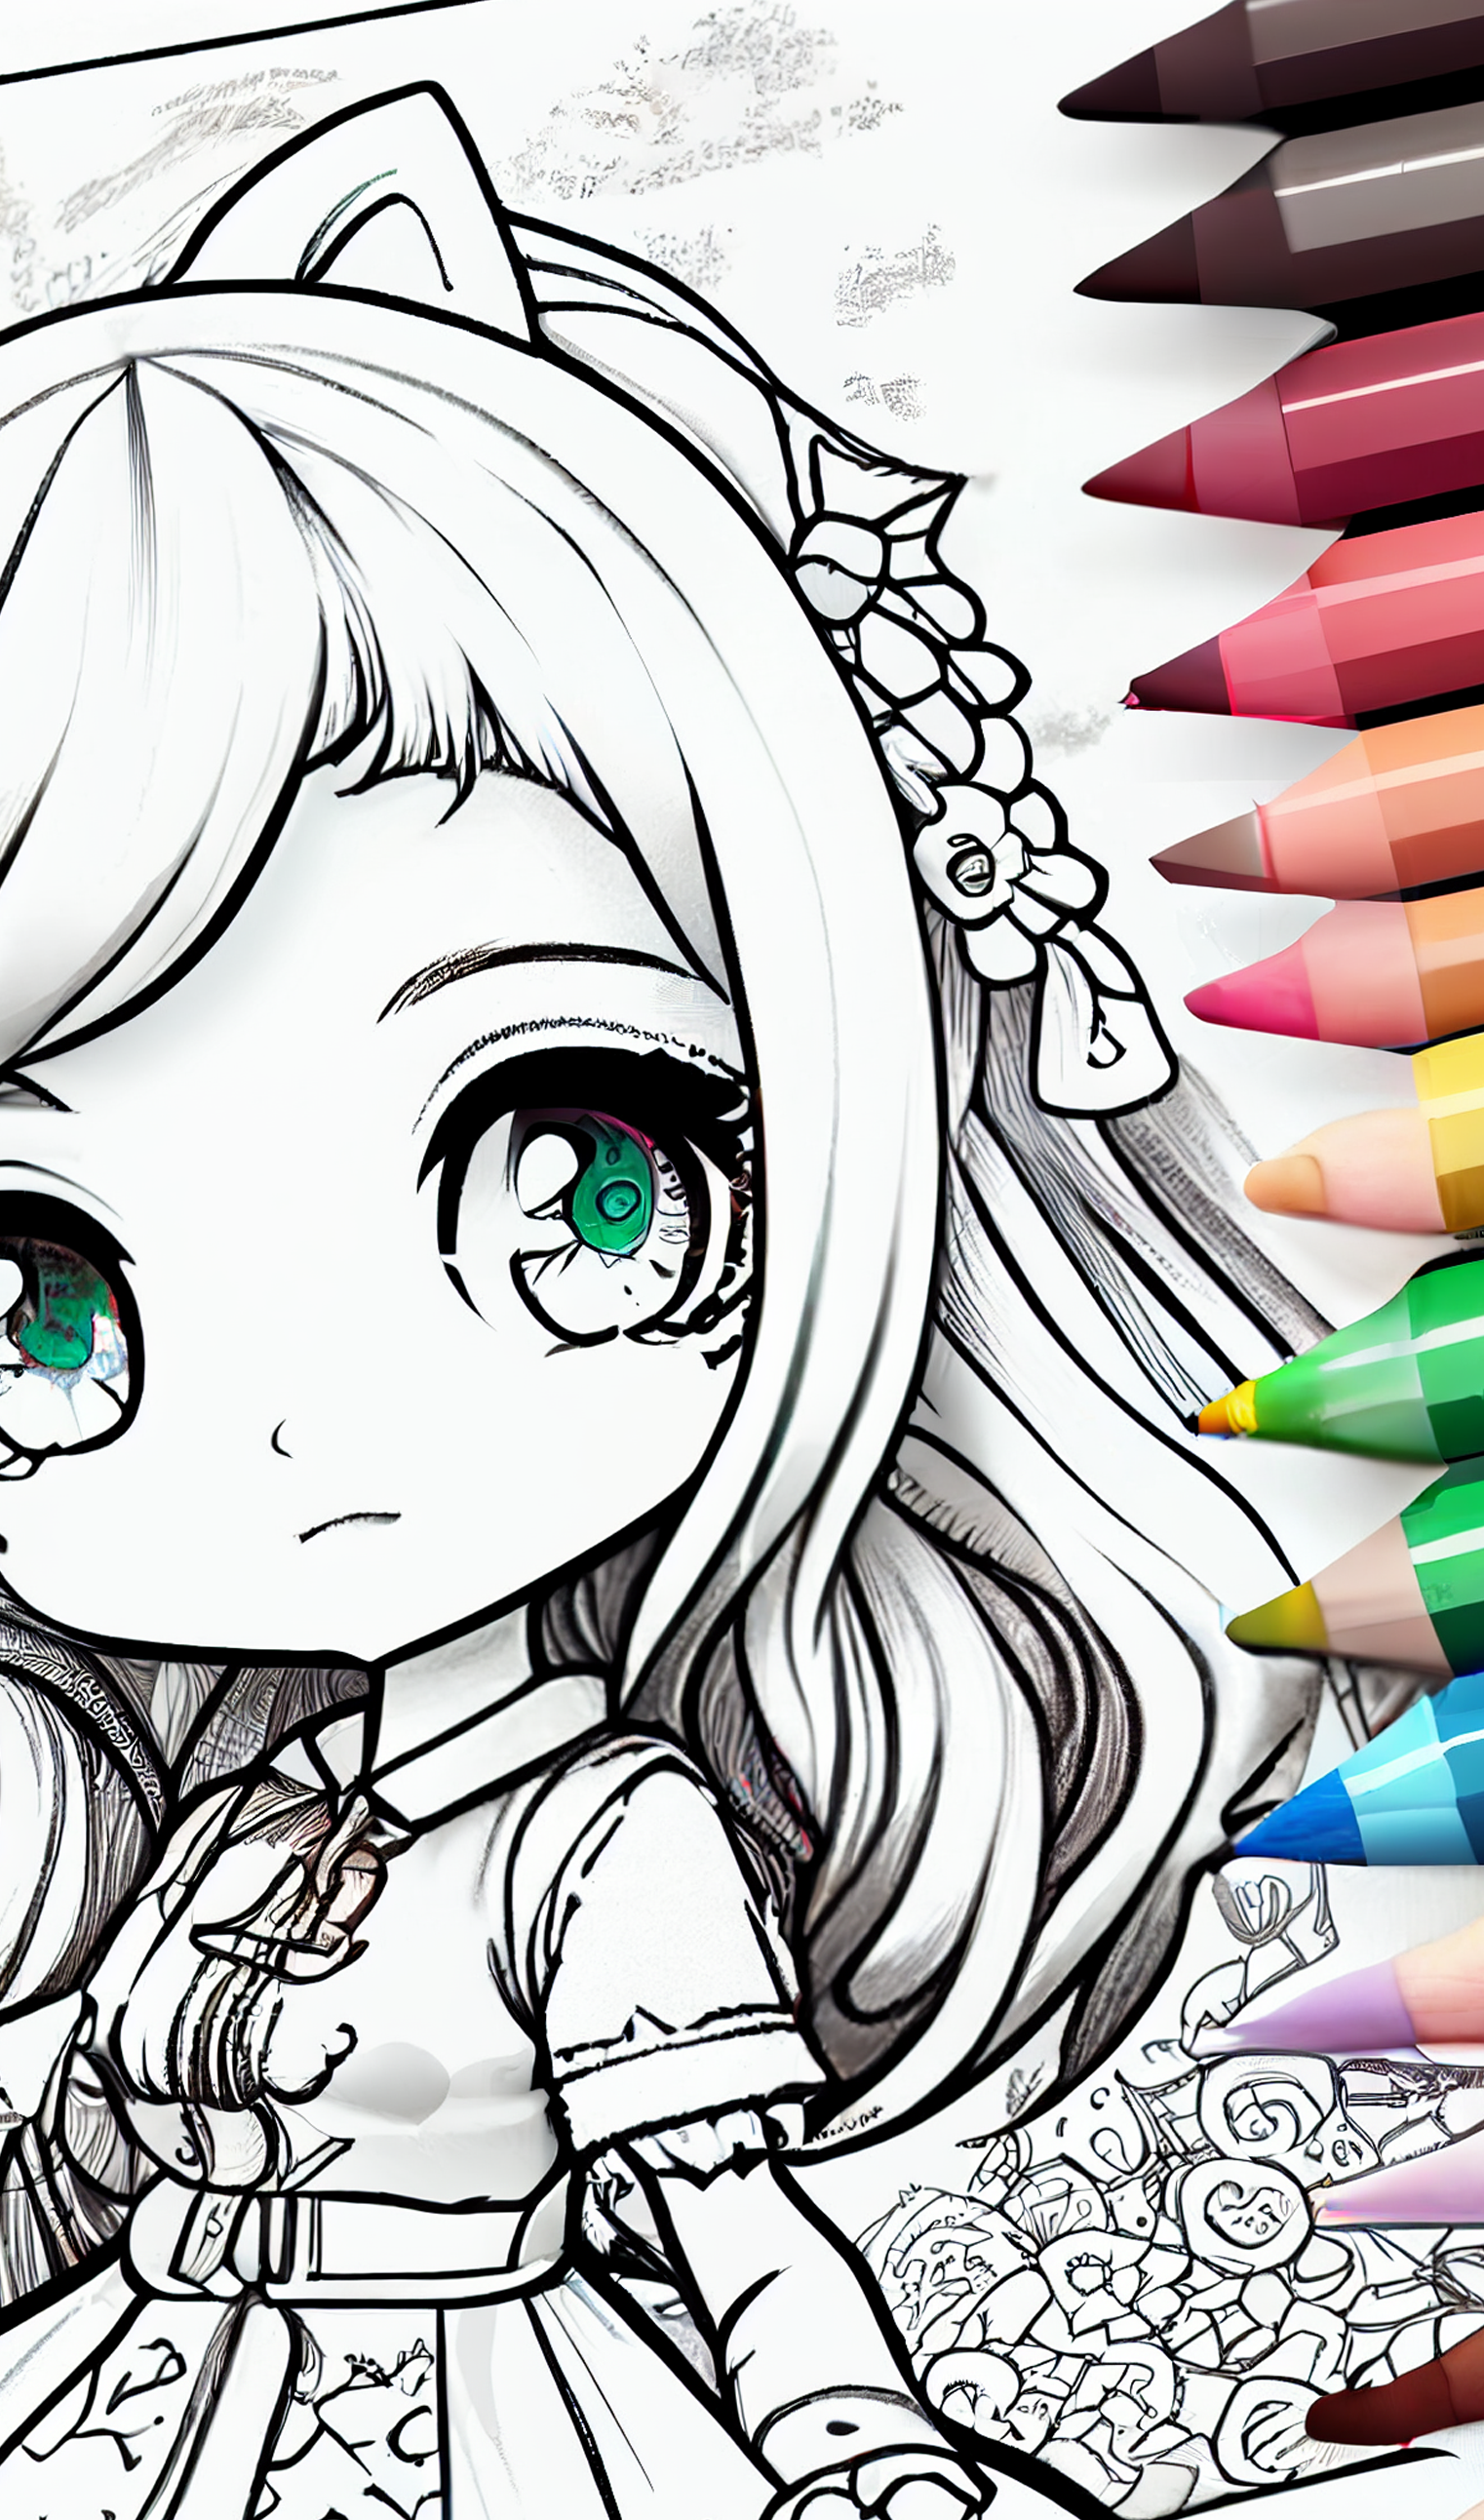 About: Coloring Book for Gacha Life 2 (Google Play version)